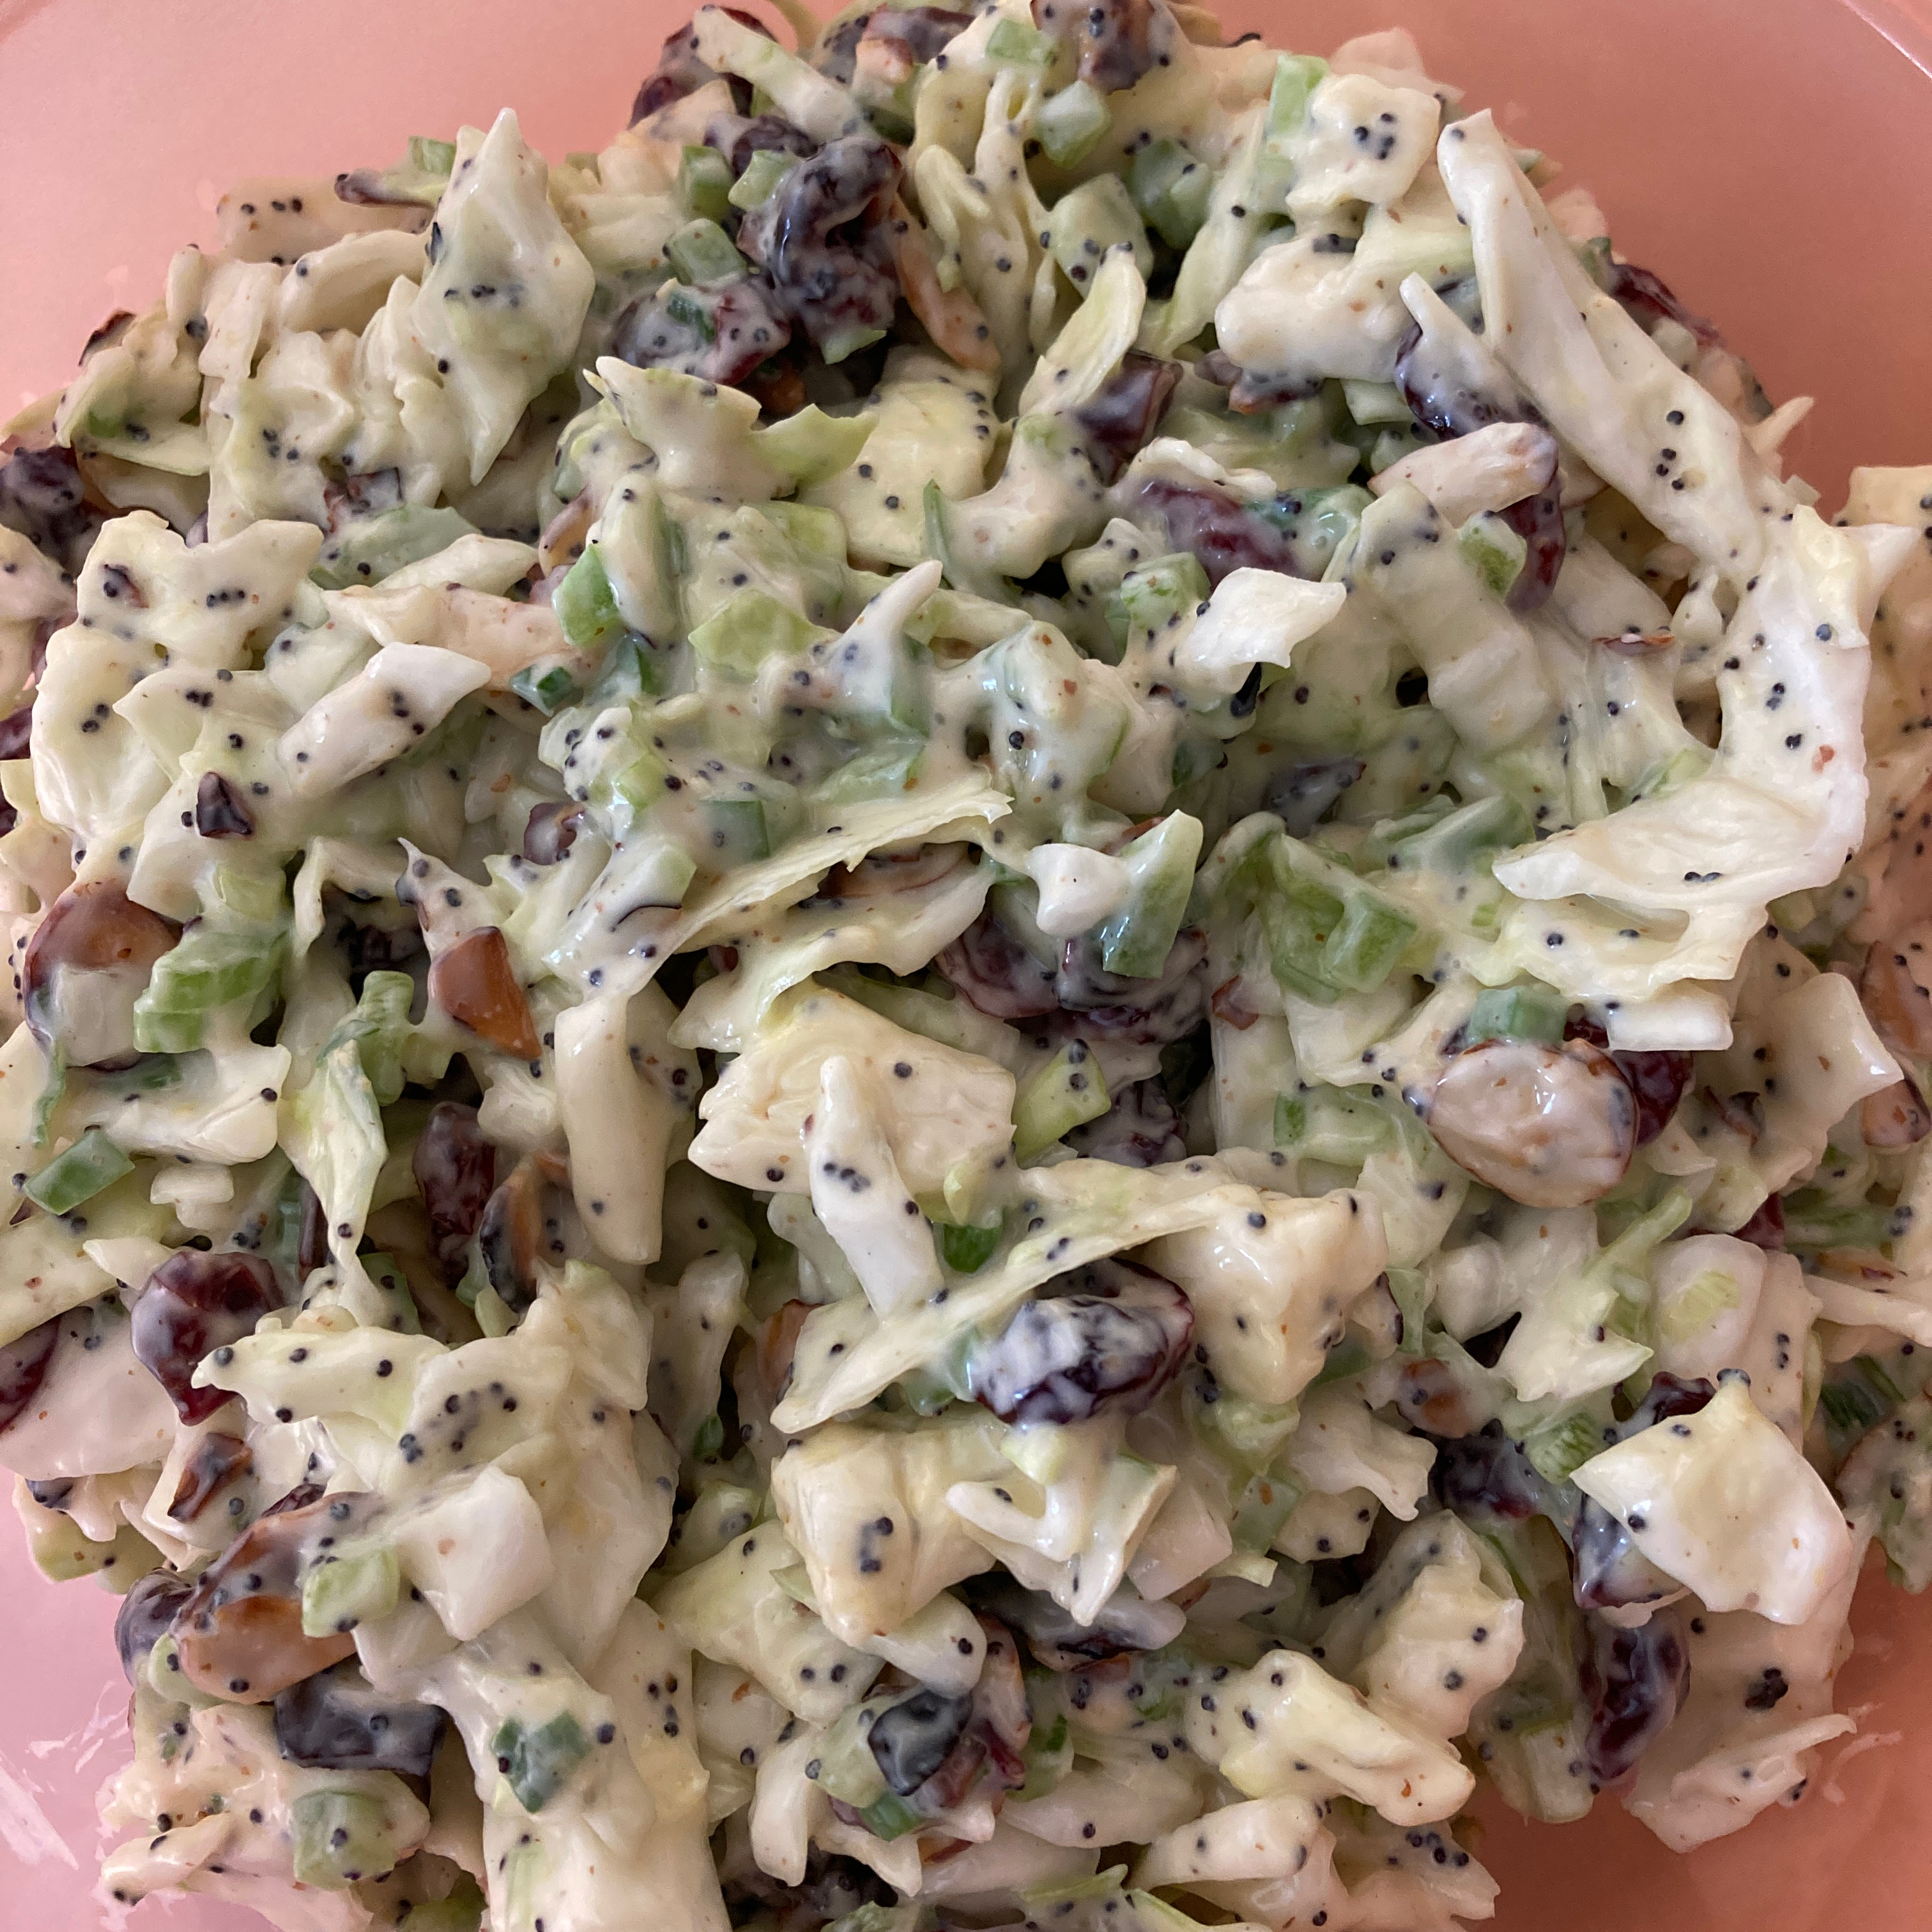 Honey Dijon Mustard and Poppy Seed Coleslaw with Cranberries and Toasted Almonds 